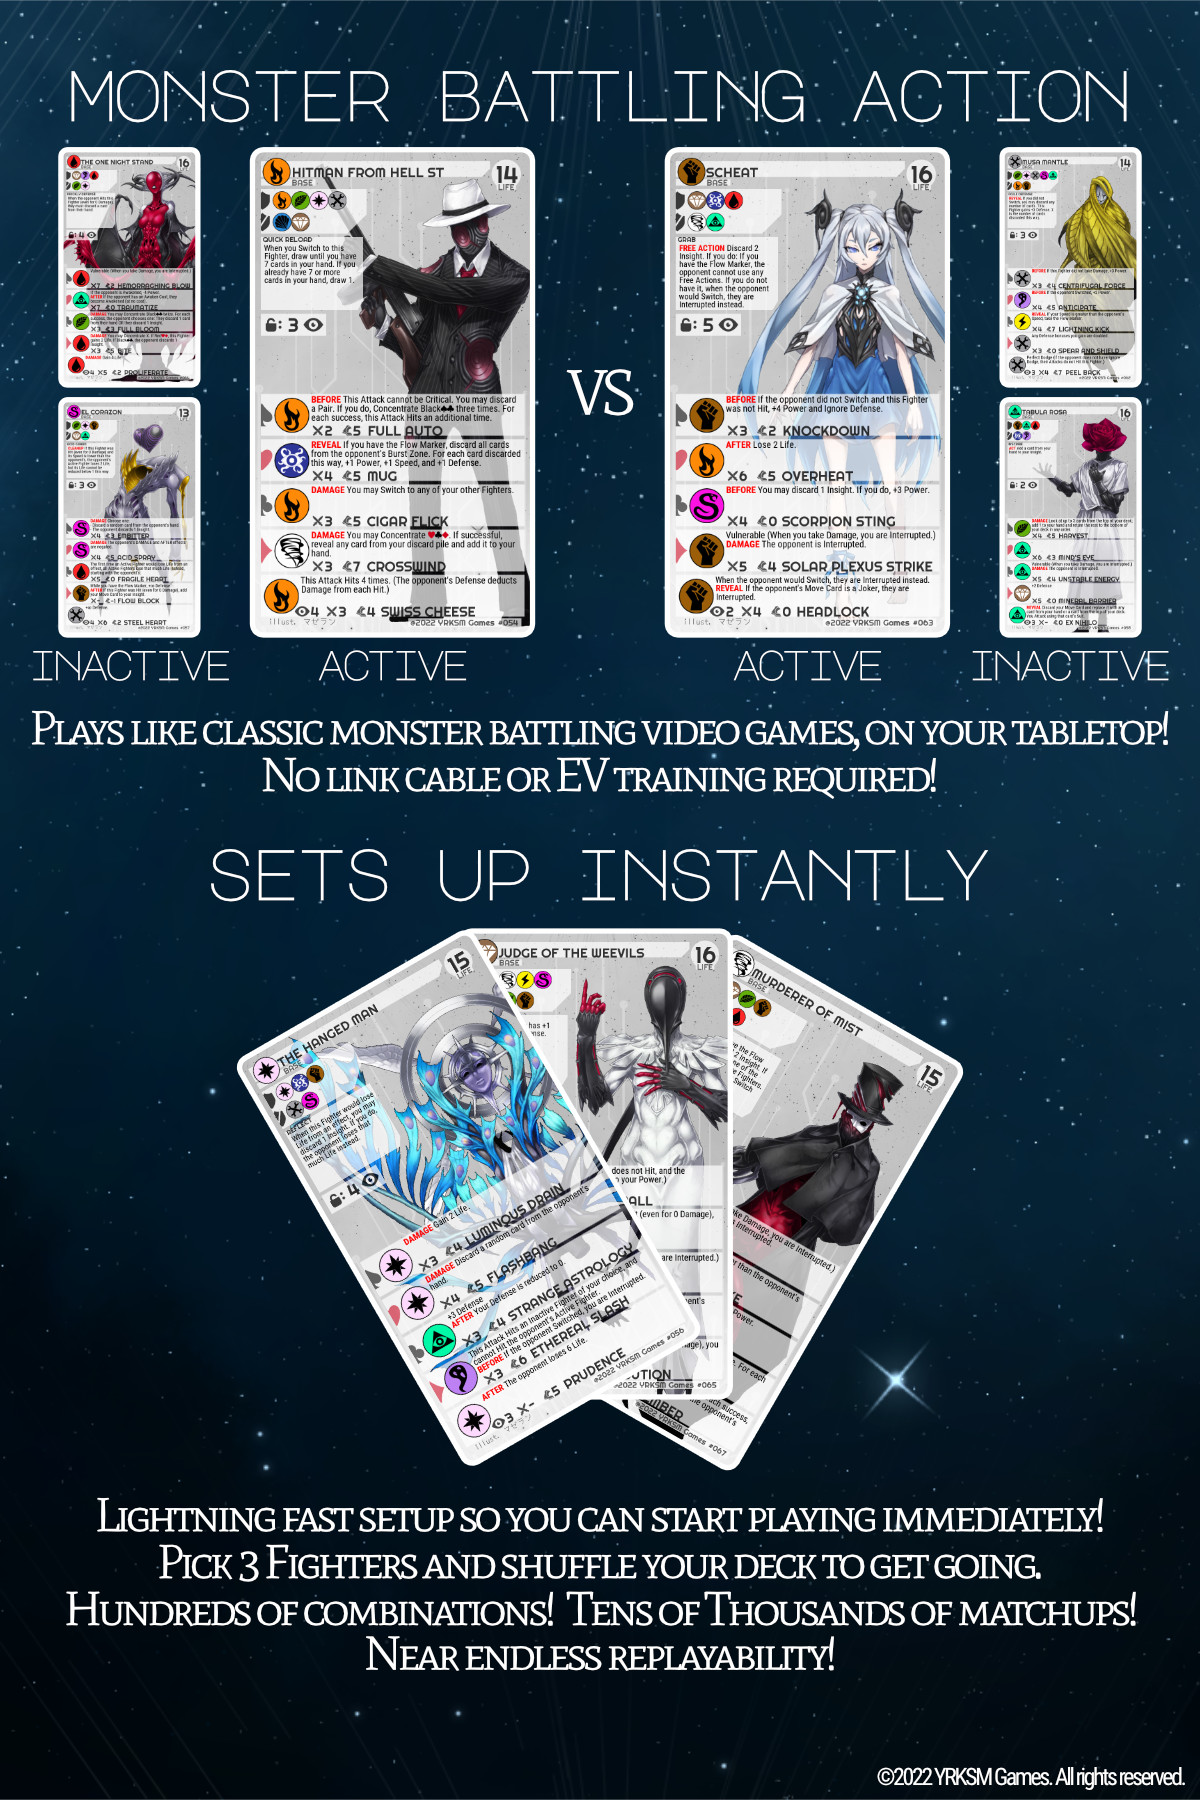 MONSTER BATTLING ACTION - Plays like classic monster battling video games, on your tabletop! No link cable or EV training required! - SETS UP INSTANTLY - Lightning fast setup so you can start playing immediately! Pick 3 Fighters and shuffle your deck to get going. Hundreds of combinations!  Tens of Thousands of matchups! Near endless replayability!